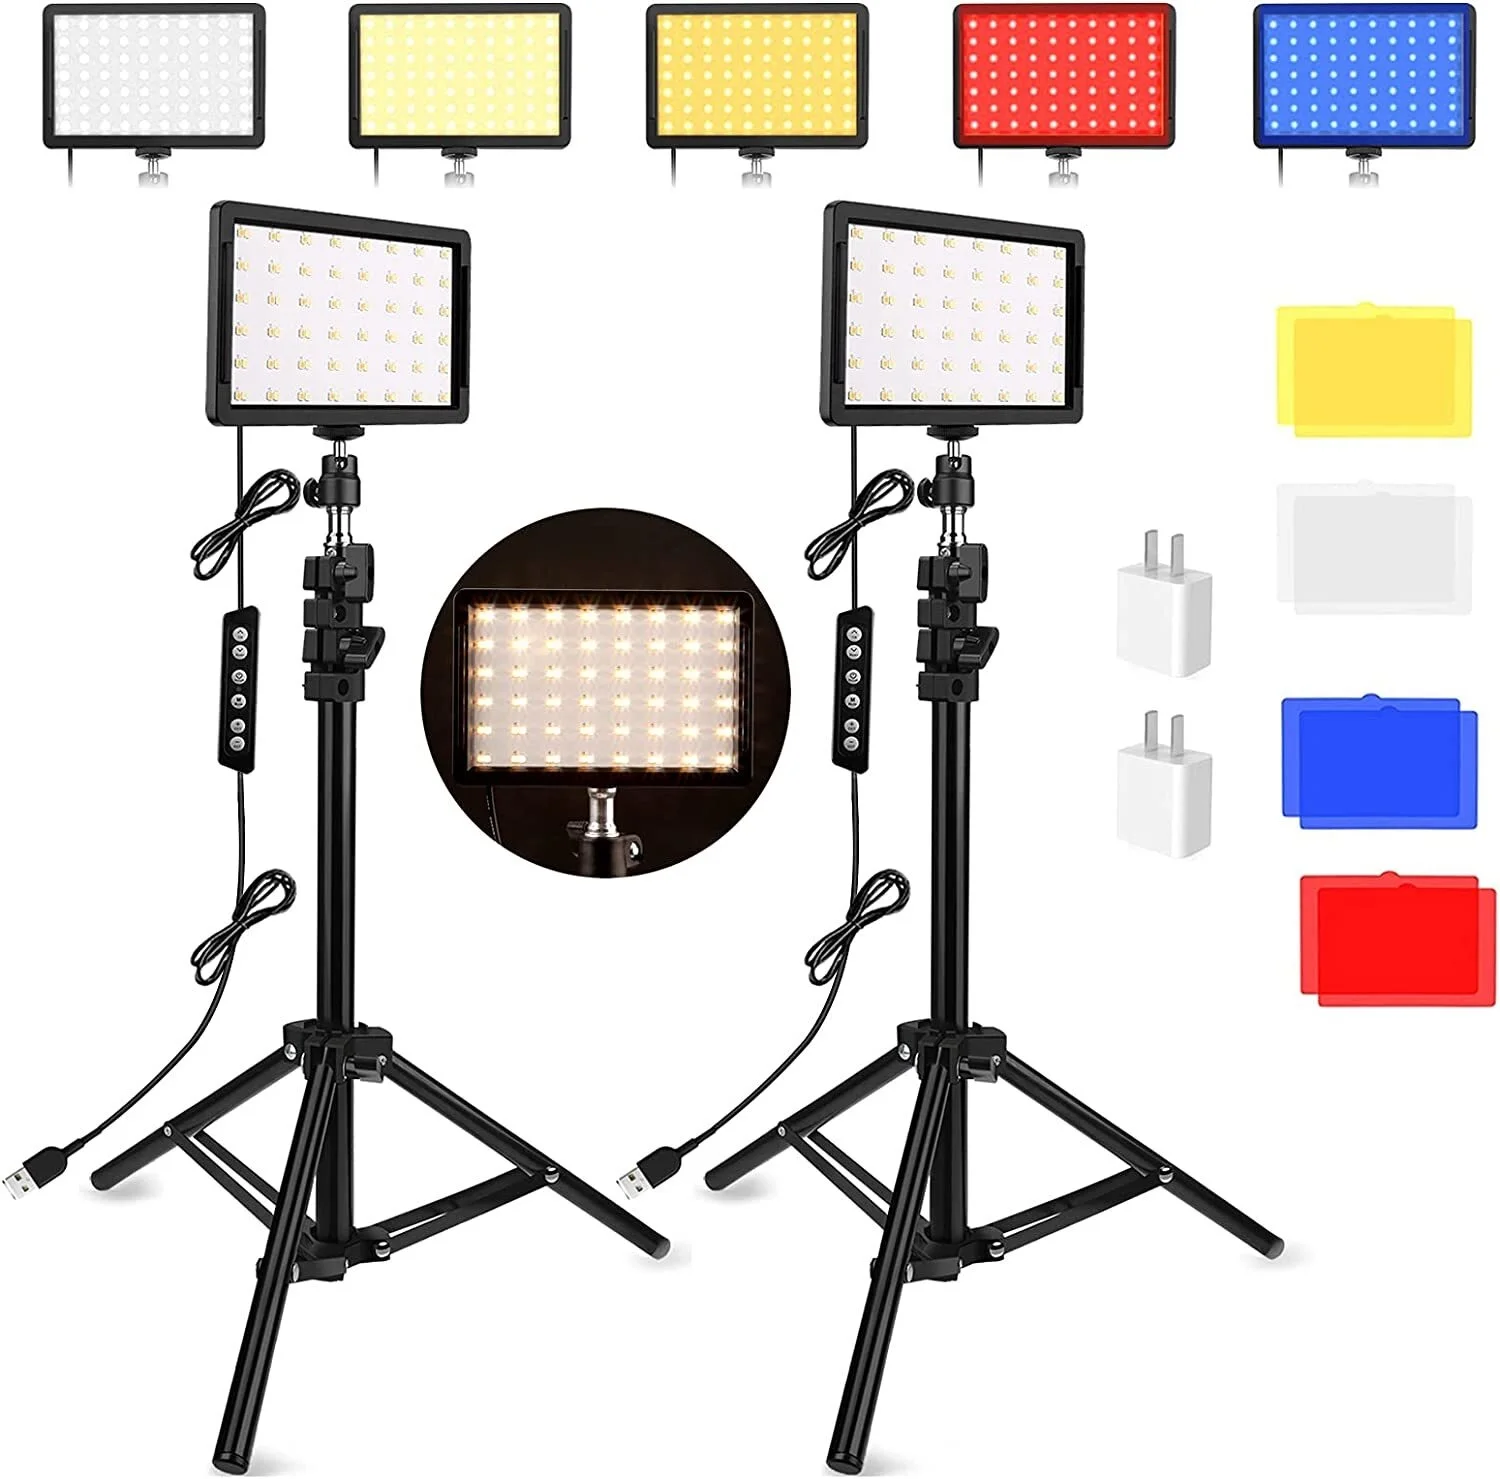 

Unicucp 2 Packs 96 Dimmable 2400-6800K Bi-Color LED Video Light 11 Brightness 97 CRI with Adjustable Tripod Stand/4 Color